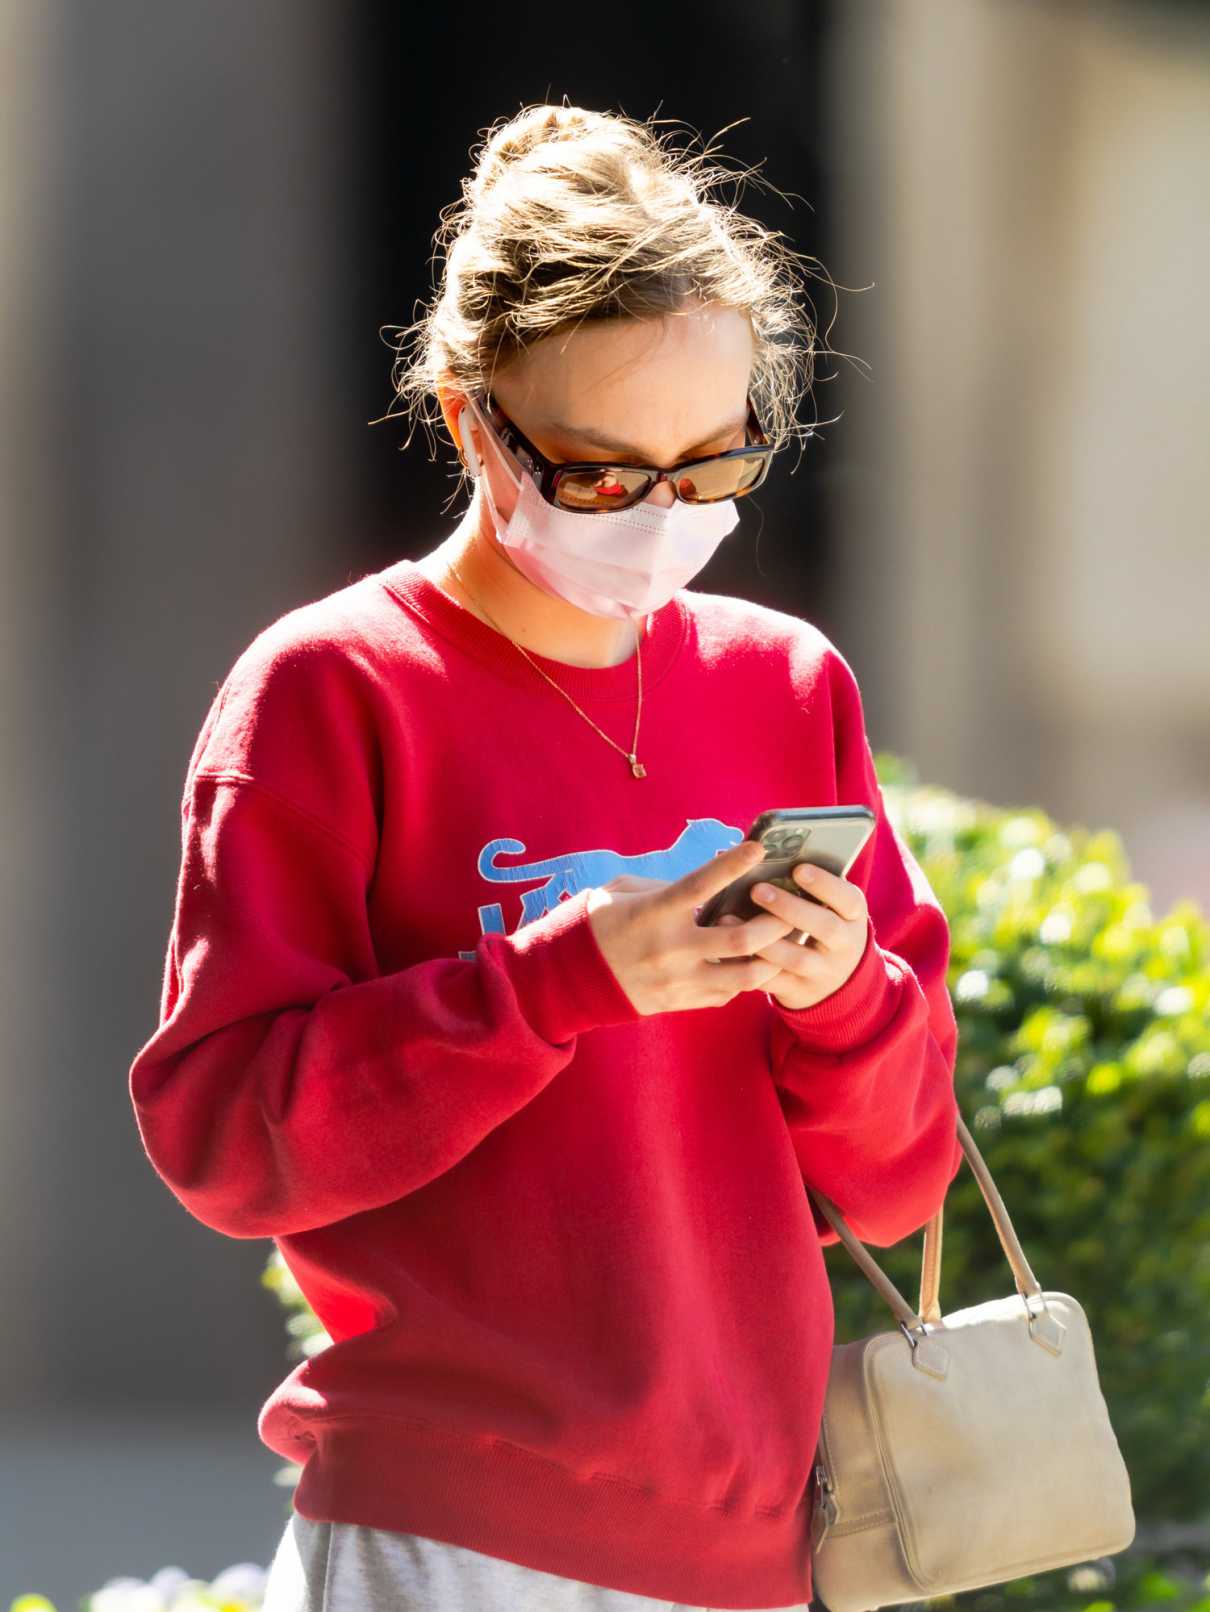 Lily-Rose Depp in a Red Sweatshirt